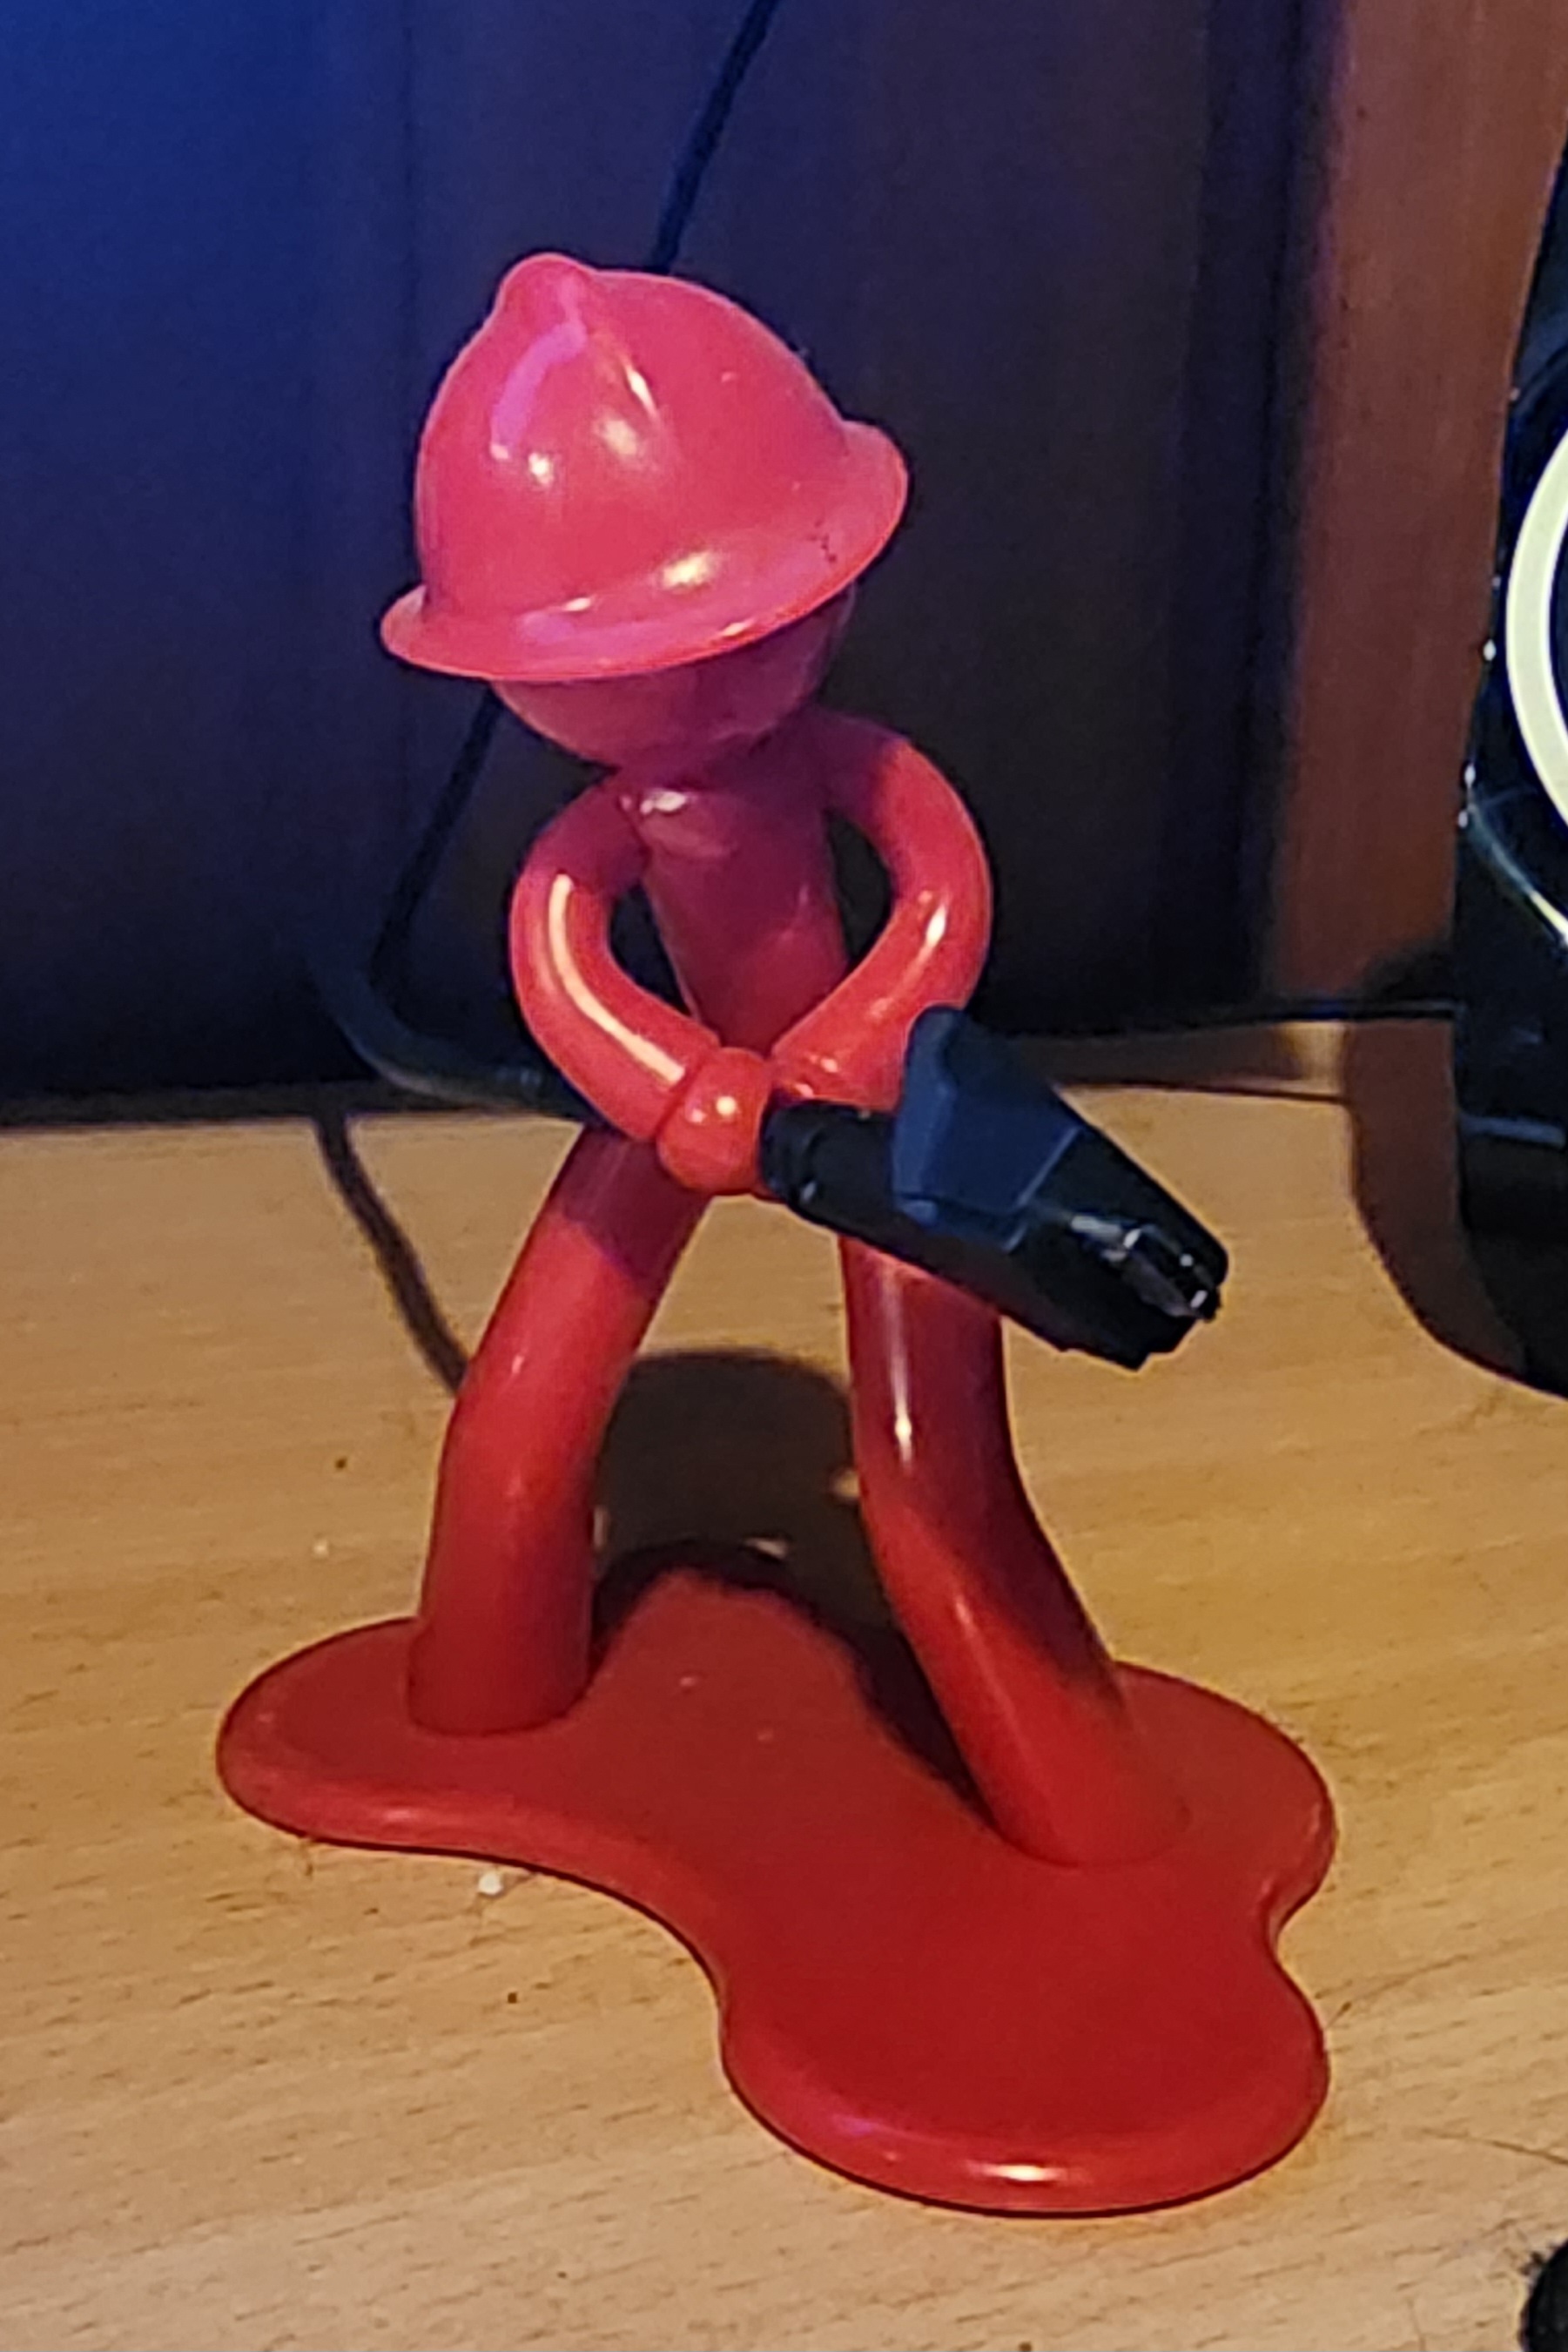 Red plastic fireman figure holding a charging cord like a fire hose